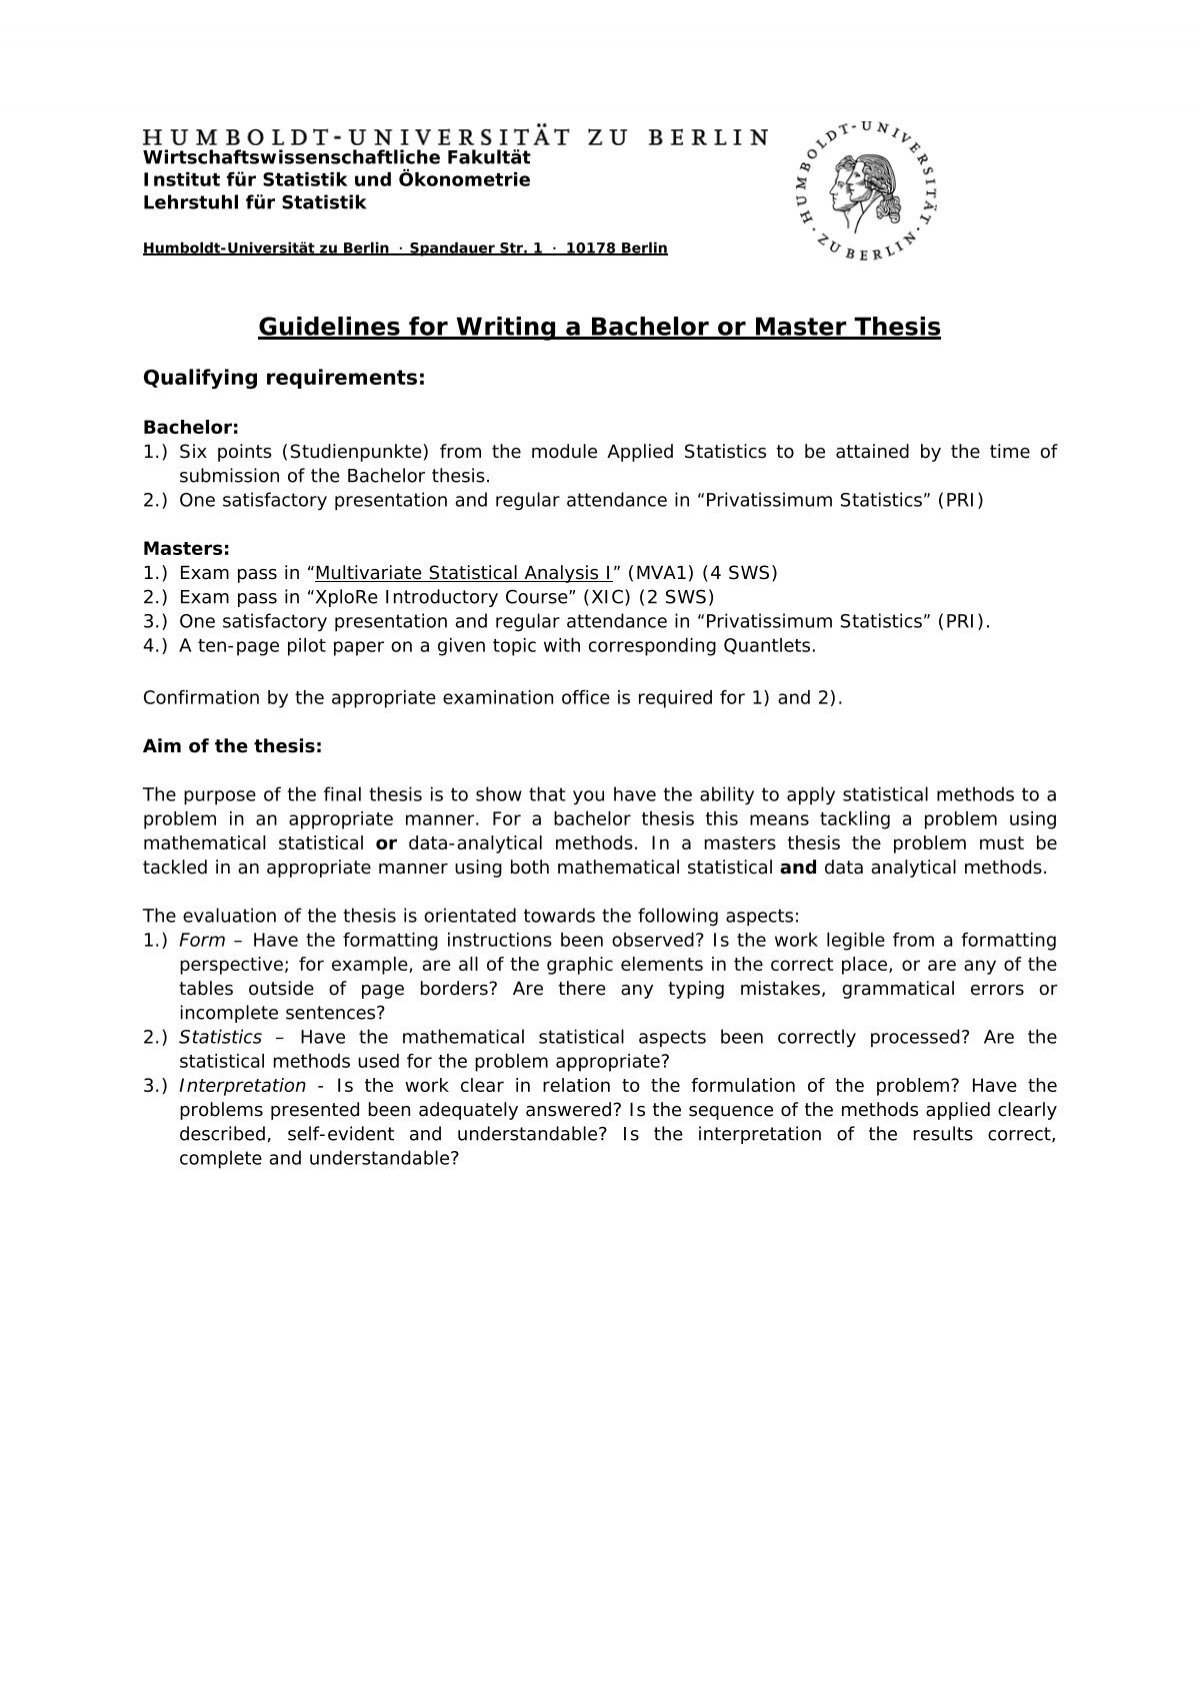 fhnw bachelor thesis guidelines